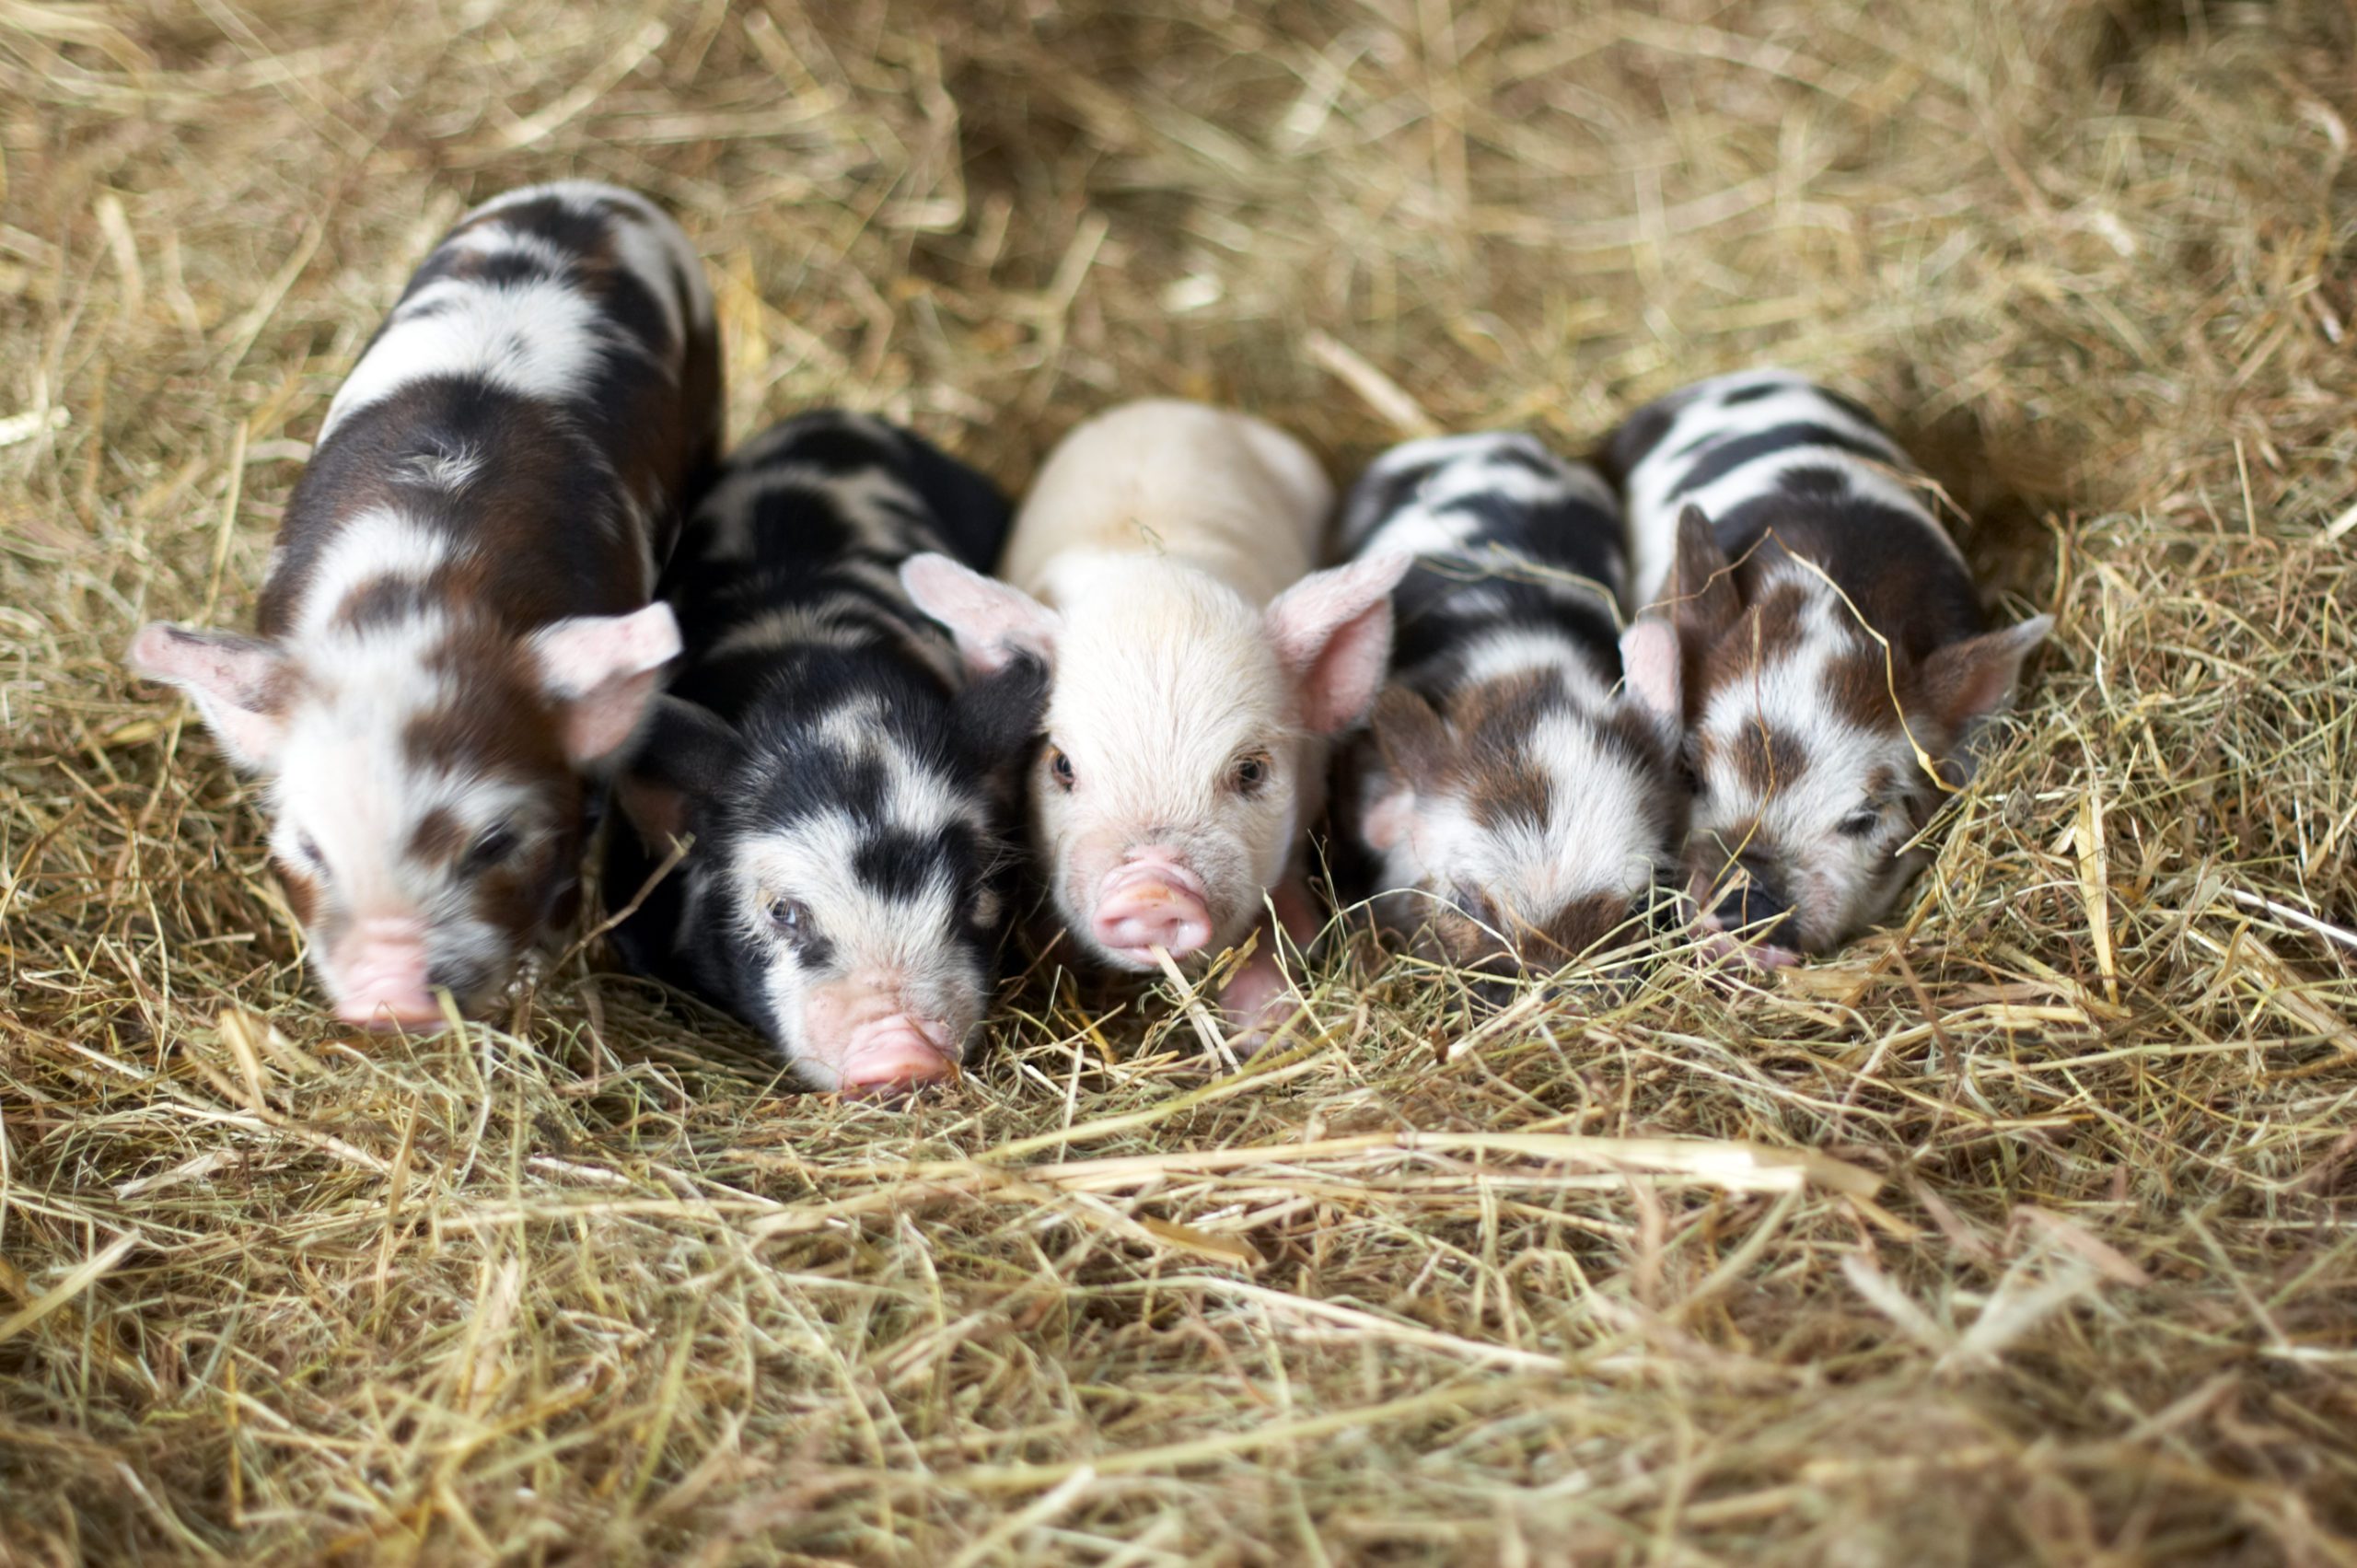 Five piglets laying together in hay